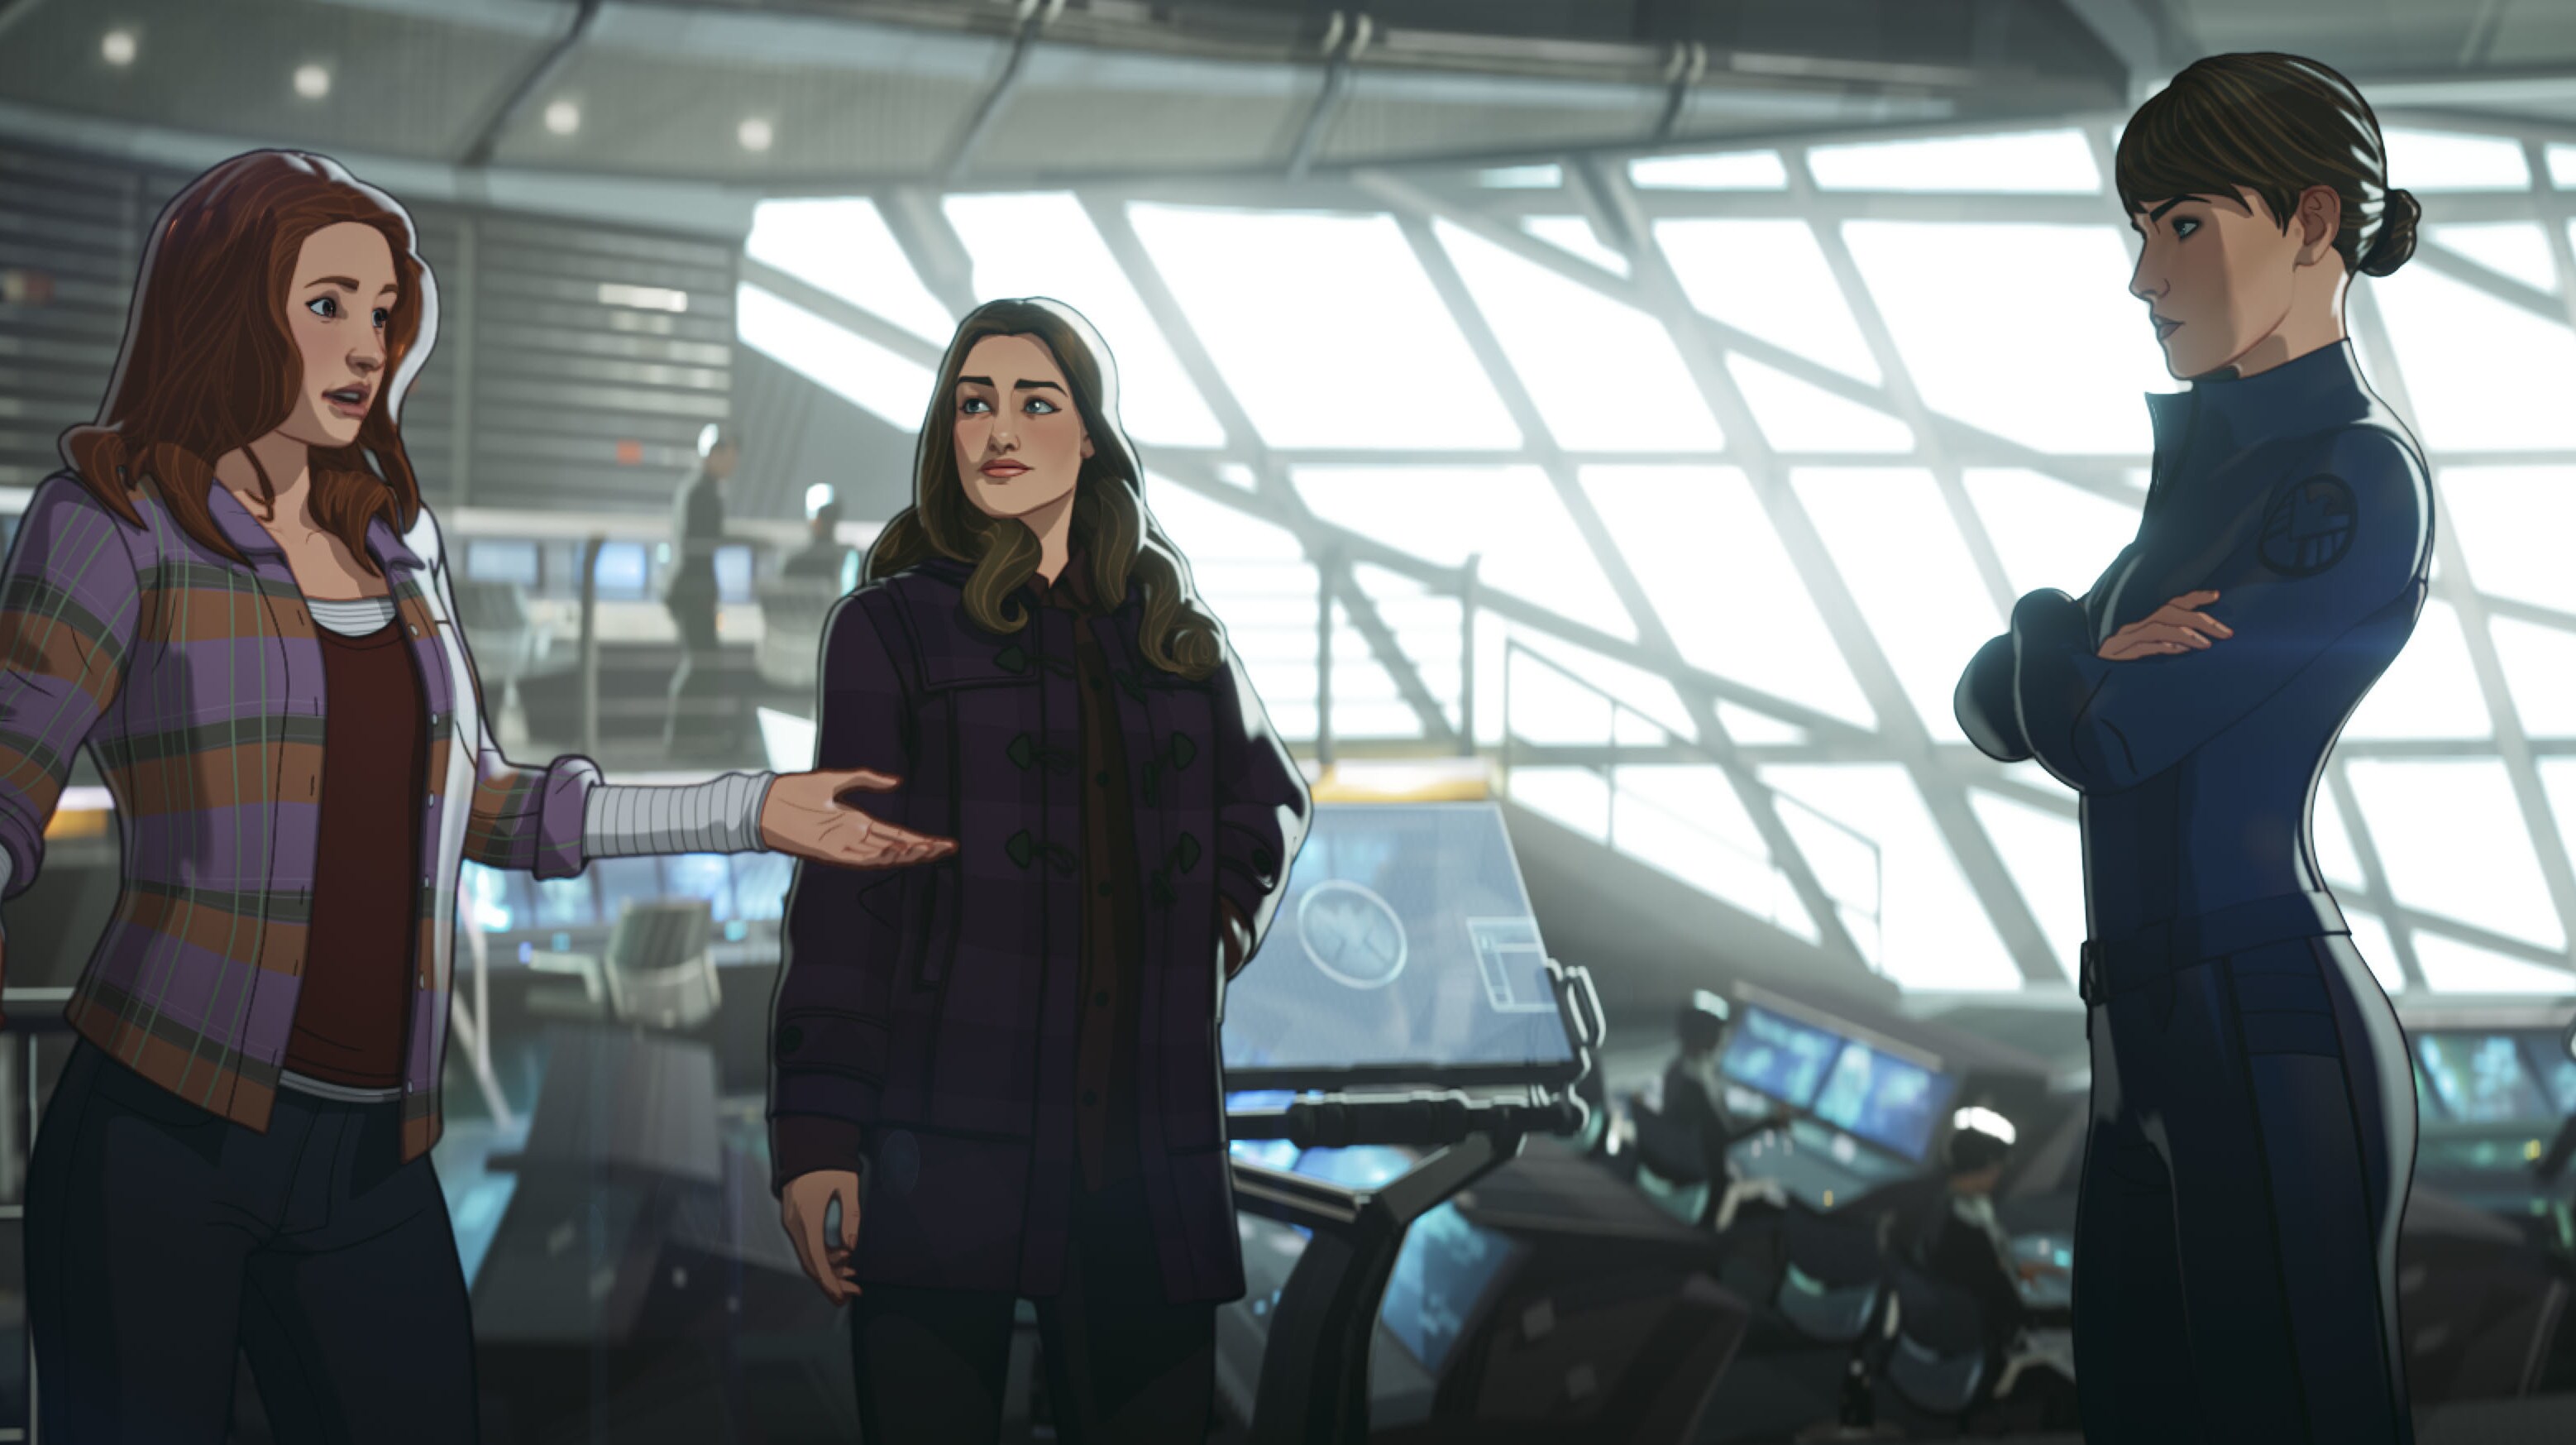 Jane Foster, Darcy, and Maria Hill in Marvel Studios' WHAT IF…? exclusively on Disney+. ©Marvel Studios 2021. All Rights Reserved.